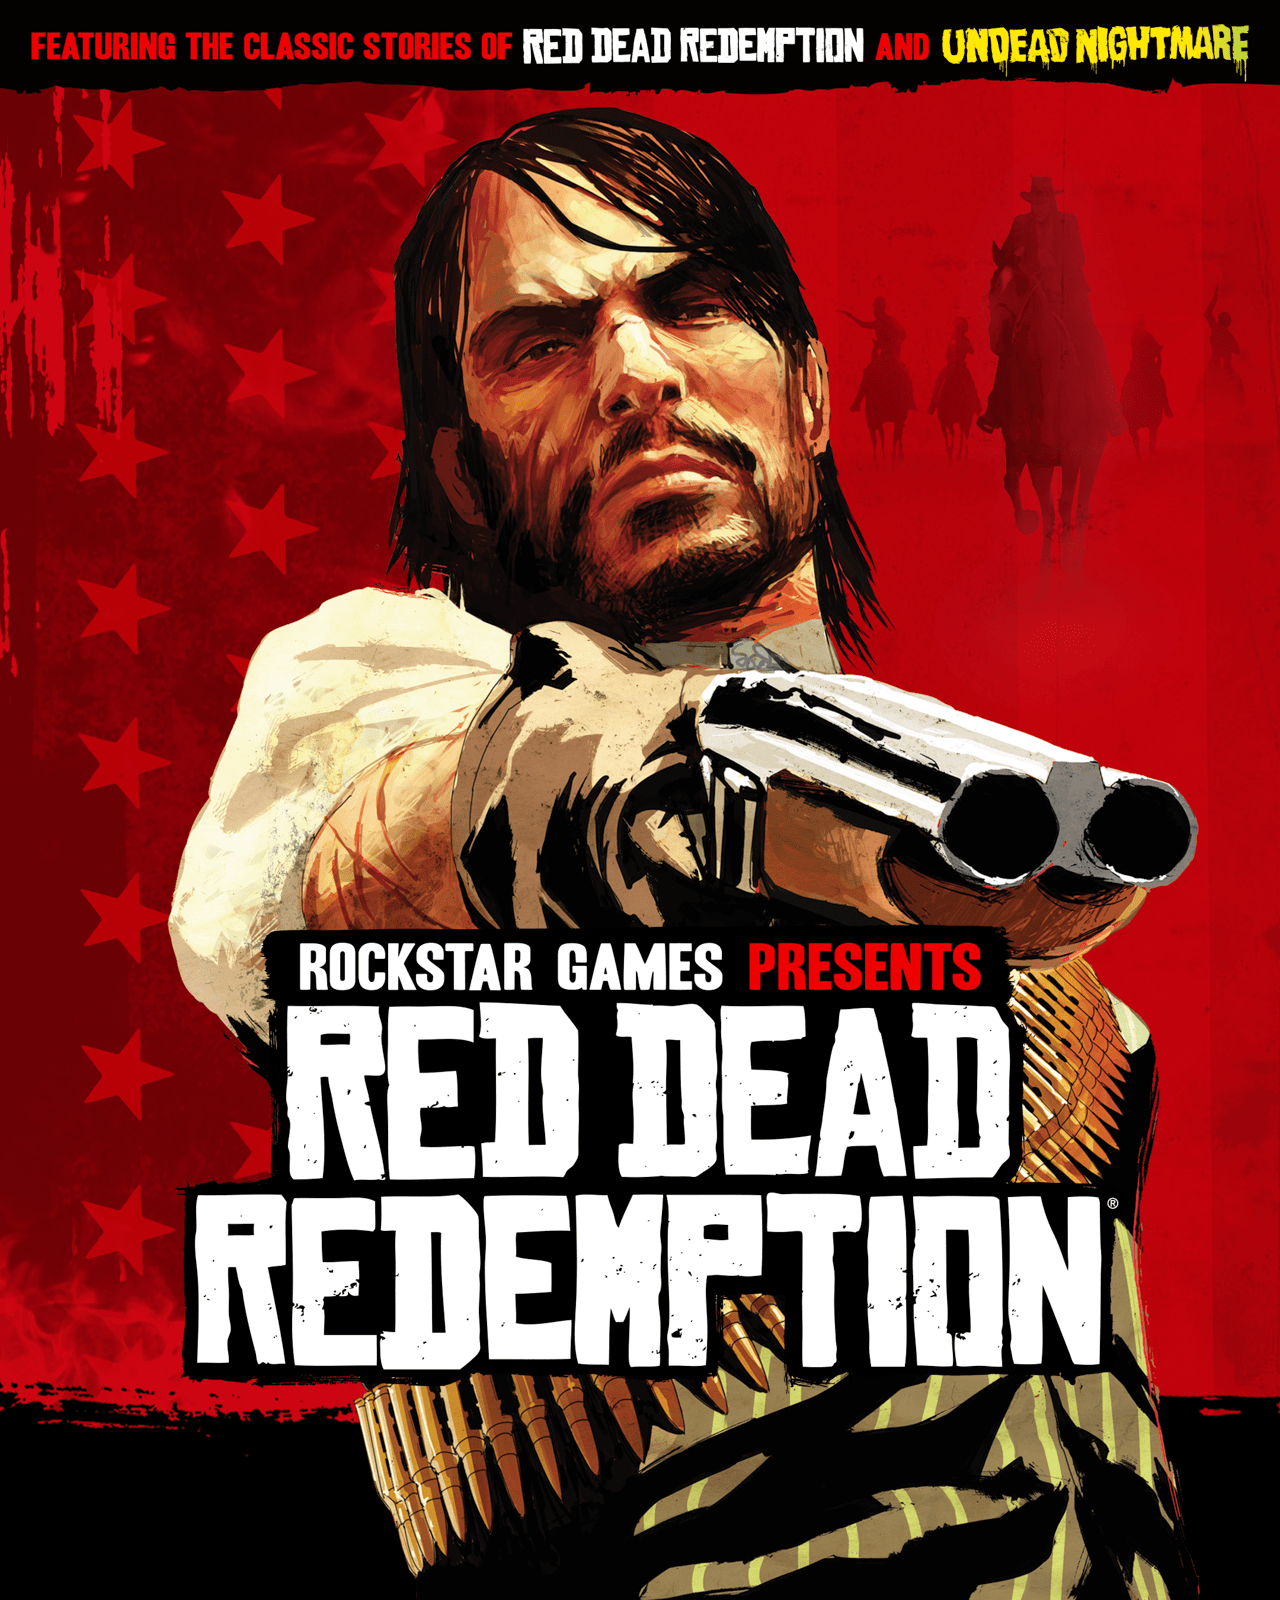 Featuring the classic stories of Red Dead Redemption and Undead Nightmare. Rockstar Games Presents Red Dead Redemption